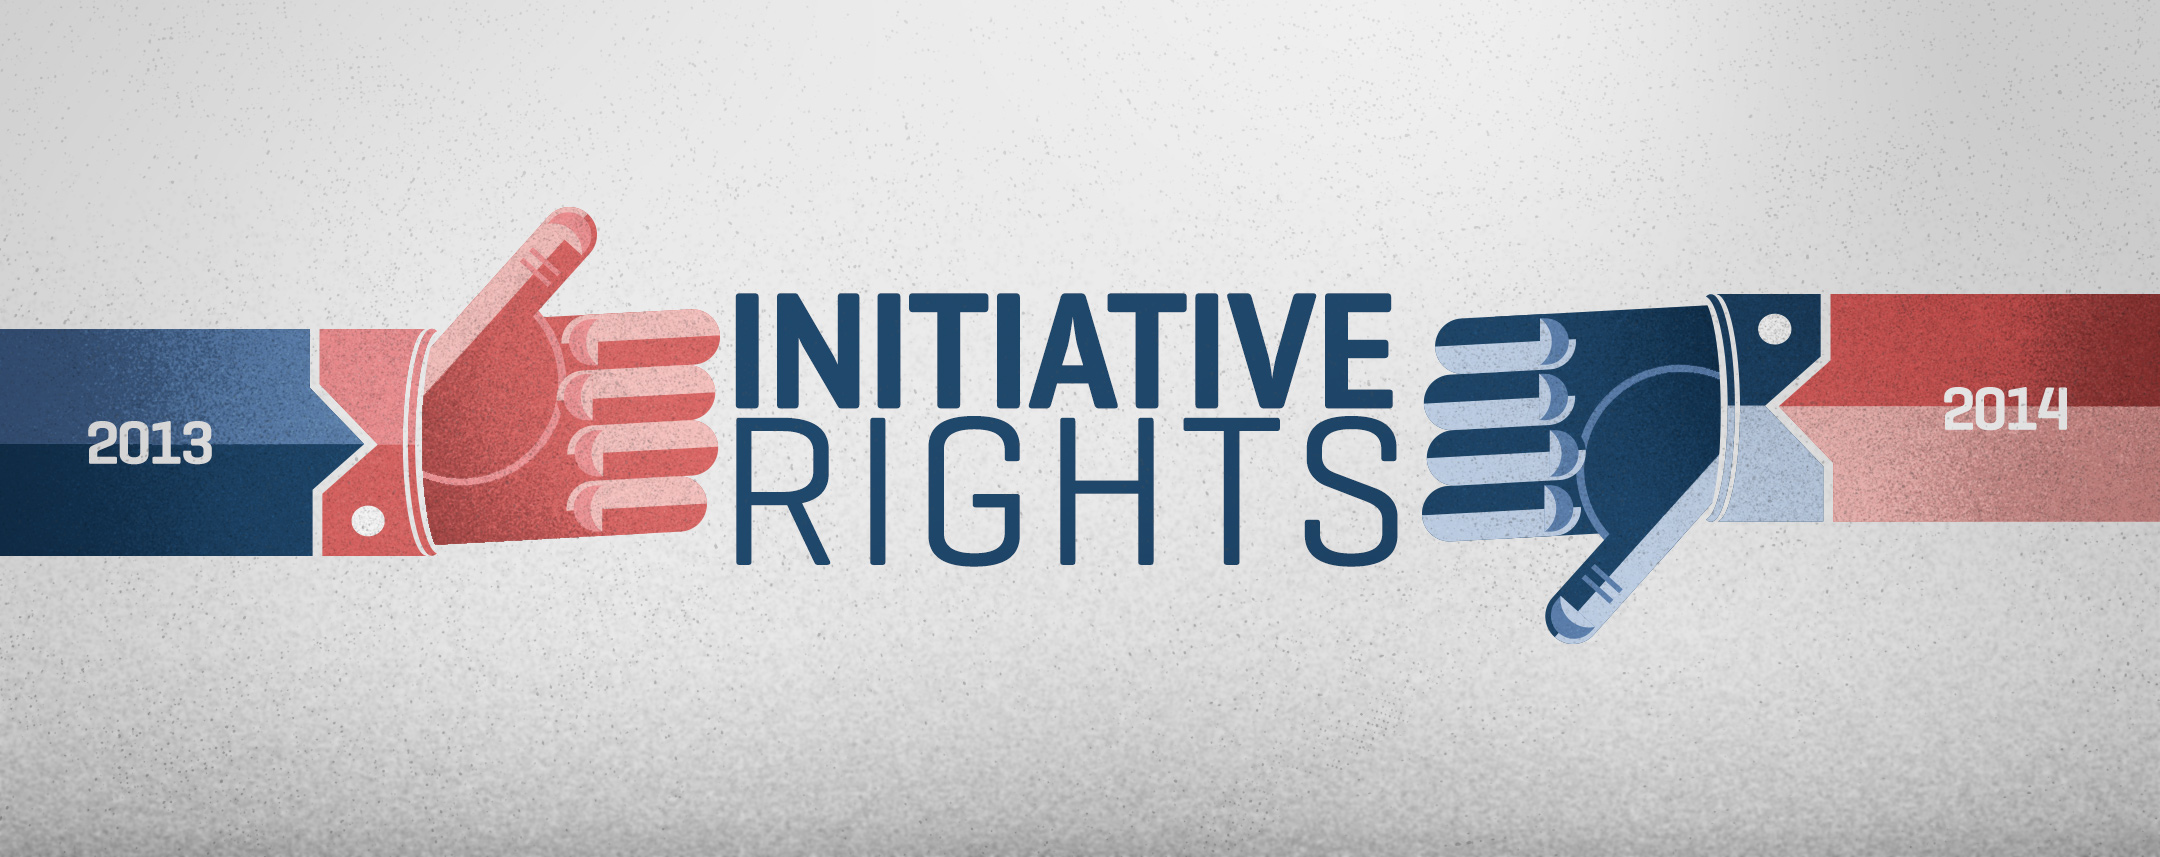 Initiative-Rights-FEATURED.jpg